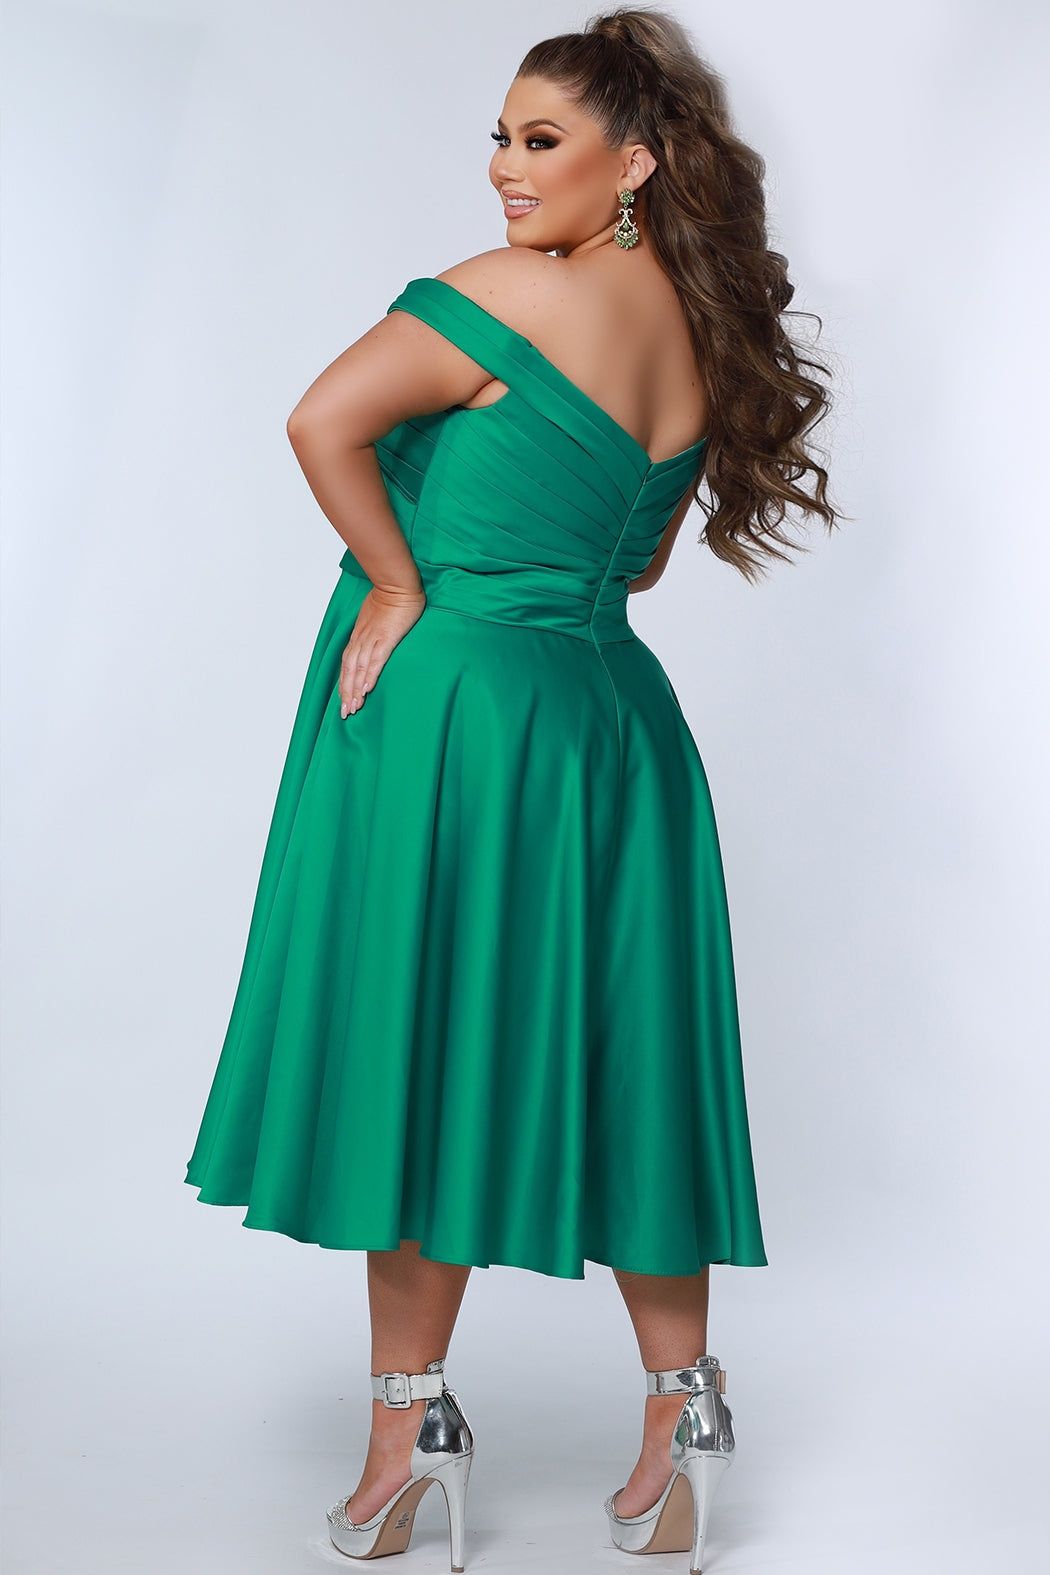 Style CE2301 Sydney's Closet Plus Size 30 Satin Emerald Green Cocktail Dress on Queenly